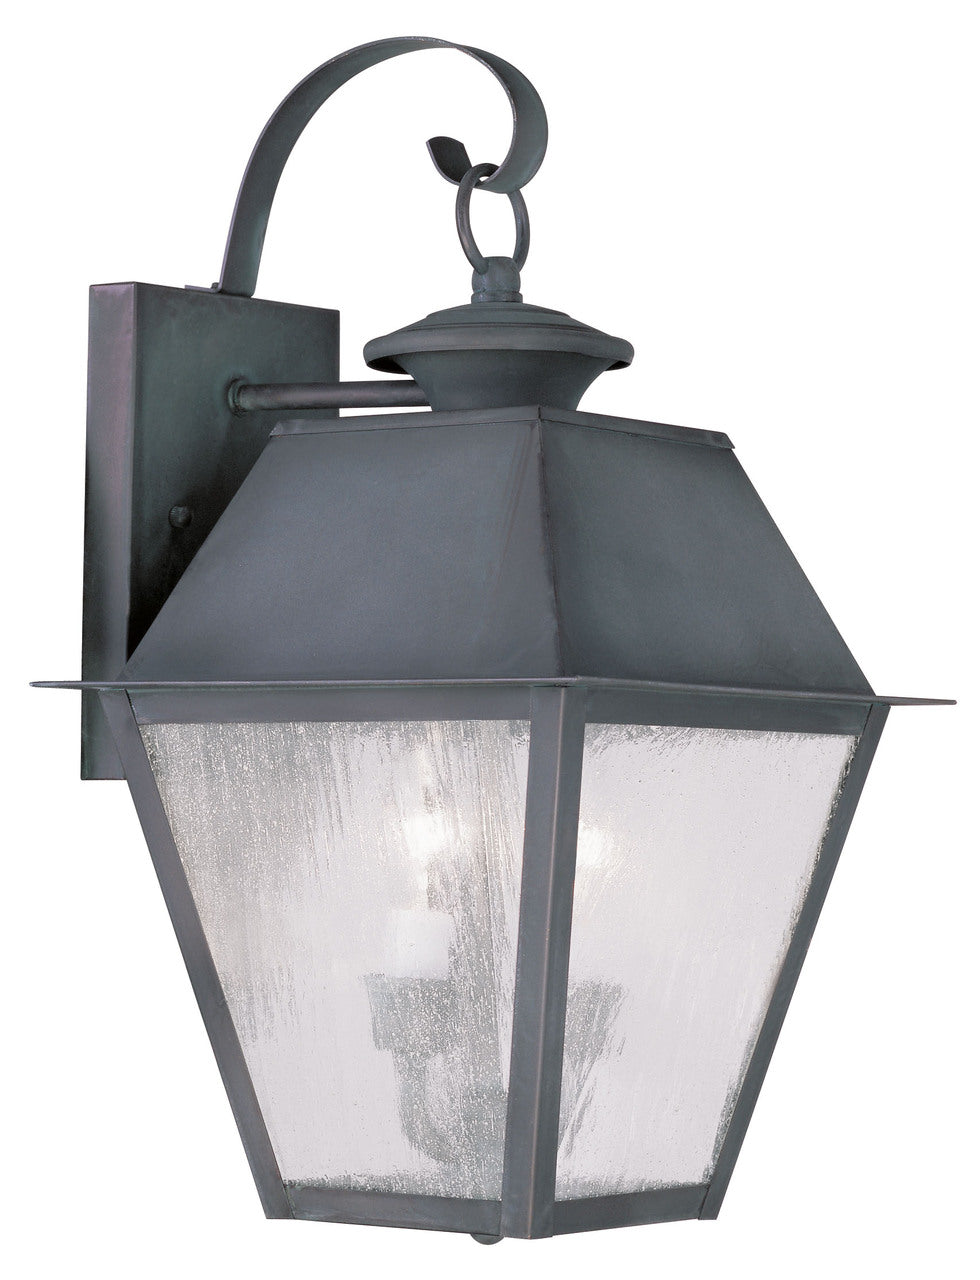 LIVEX Lighting 2165-61 Mansfield Outdoor Wall Lantern in Charcoal (2 Light)